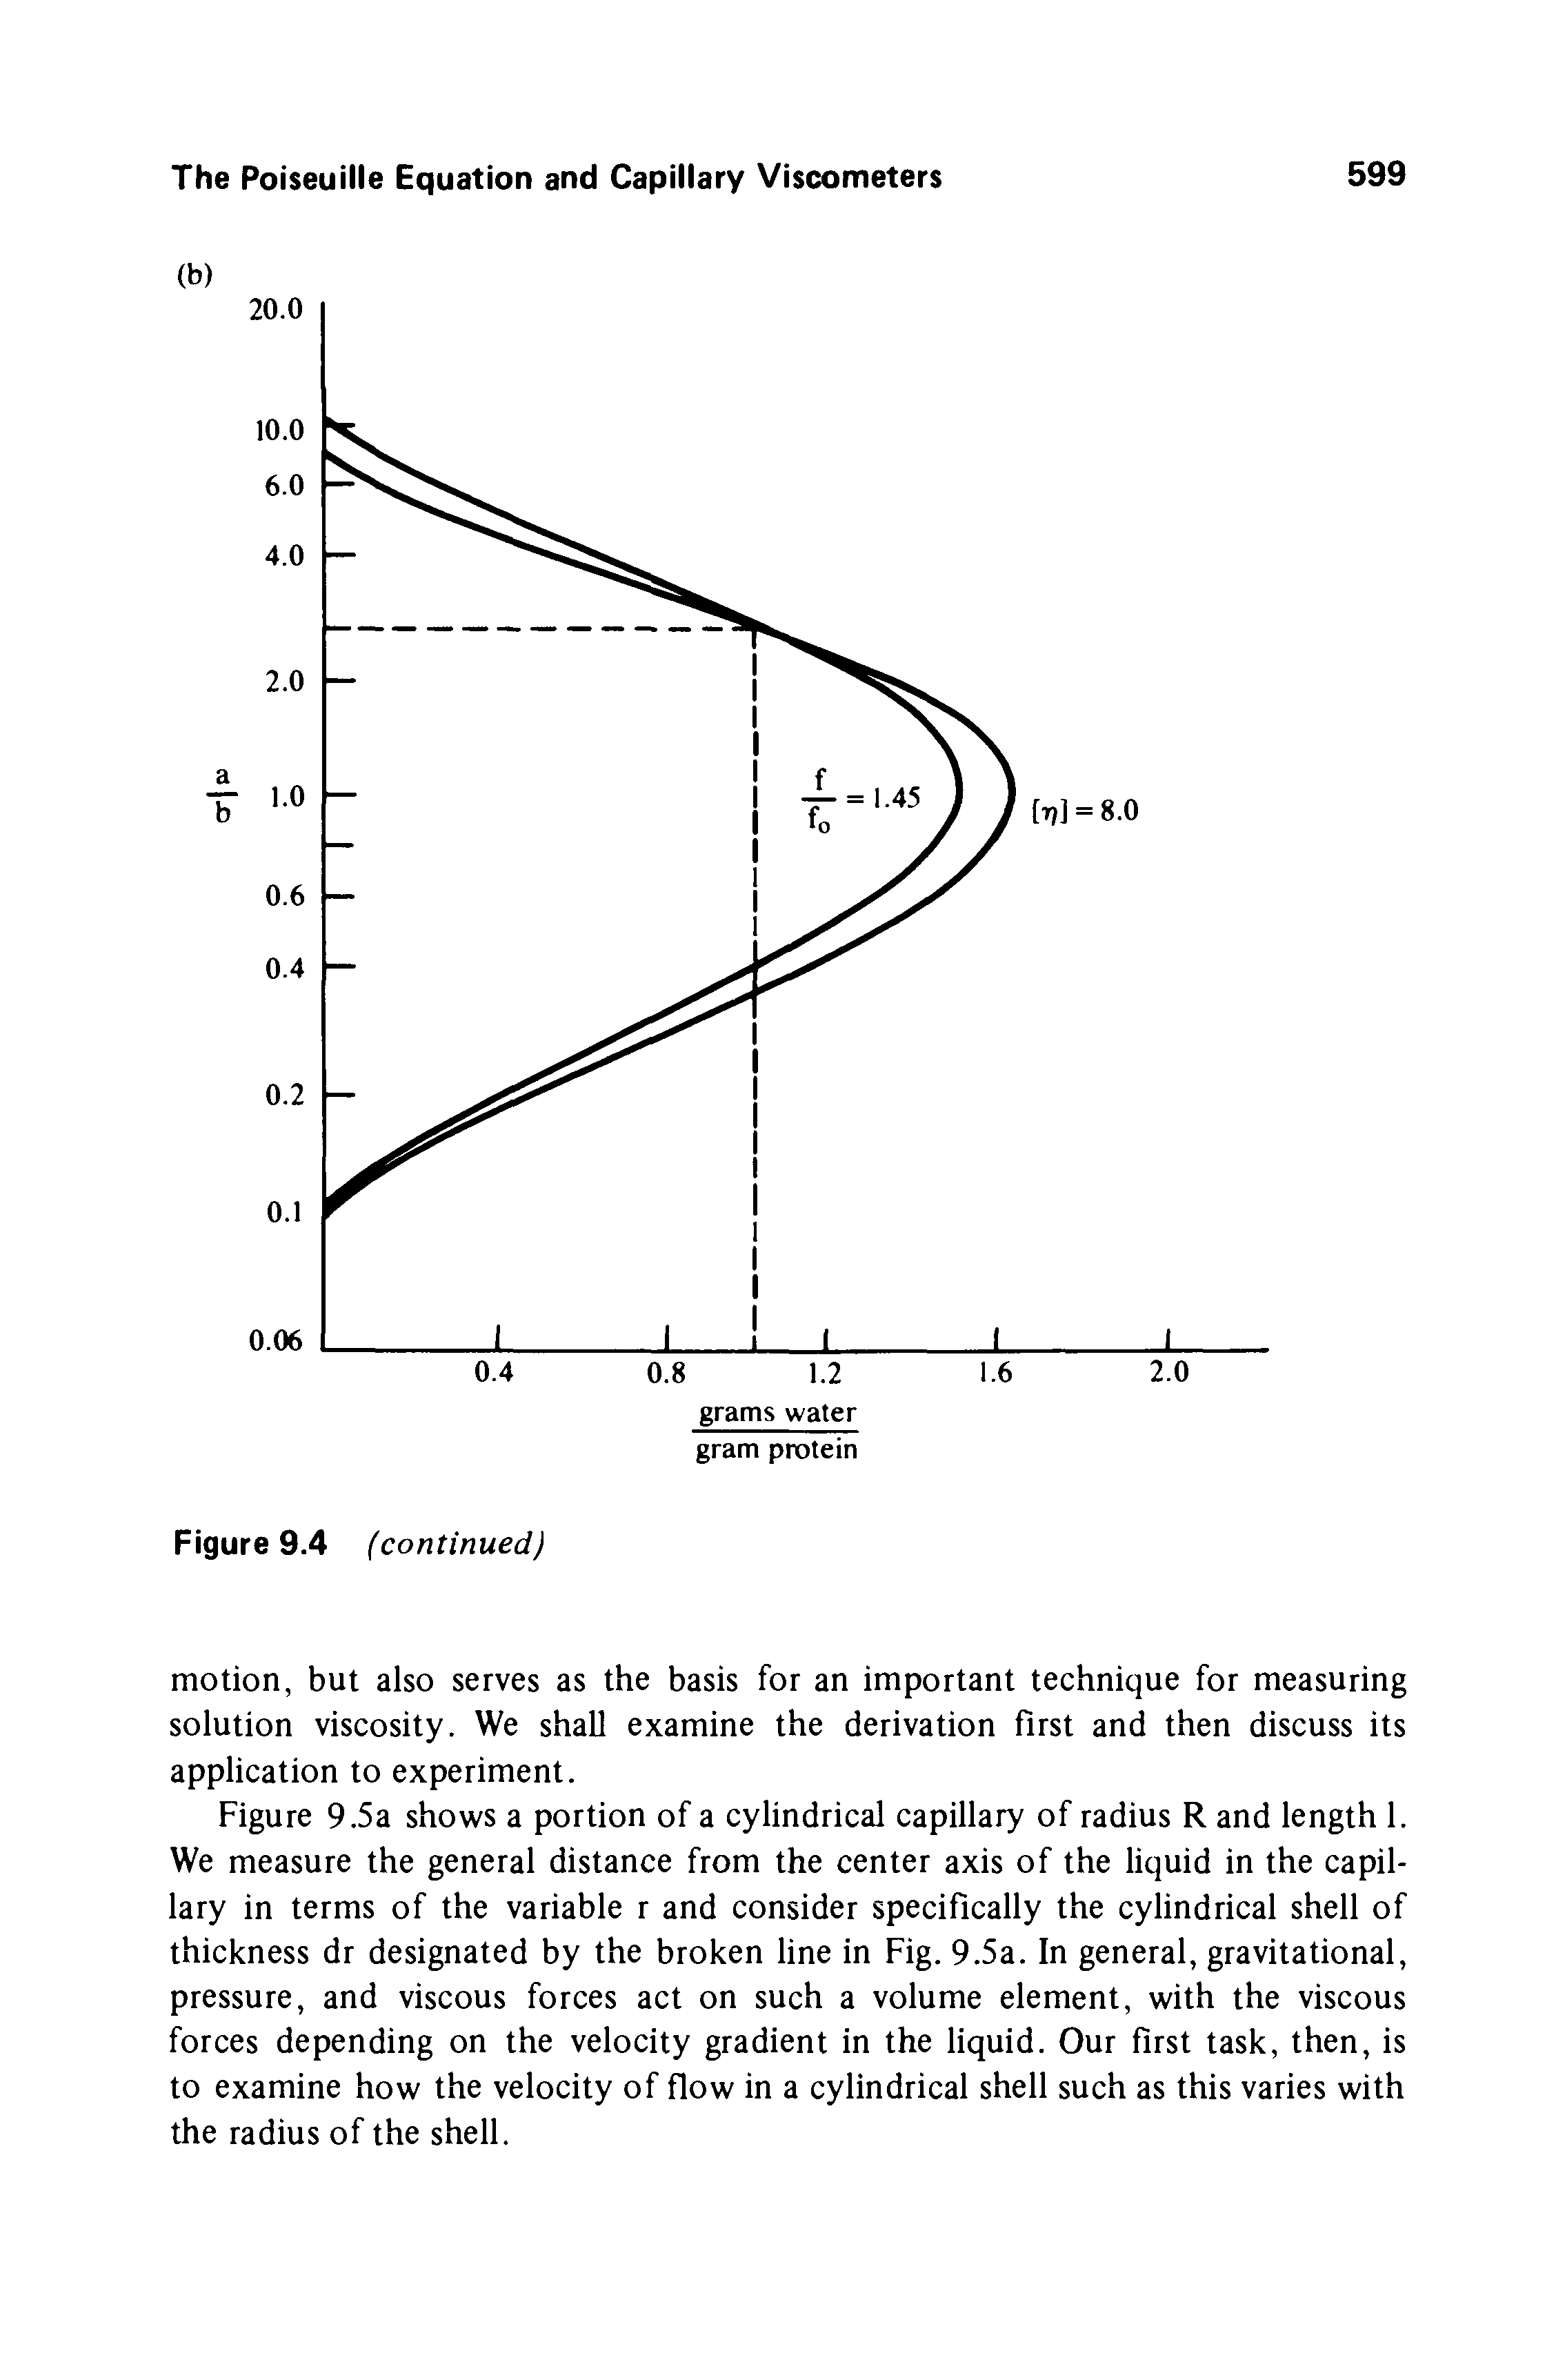 Figure 9.5a shows a portion of a cylindrical capillary of radius R and length 1. We measure the general distance from the center axis of the liquid in the capillary in terms of the variable r and consider specifically the cylindrical shell of thickness dr designated by the broken line in Fig. 9.5a. In general, gravitational, pressure, and viscous forces act on such a volume element, with the viscous forces depending on the velocity gradient in the liquid. Our first task, then, is to examine how the velocity of flow in a cylindrical shell such as this varies with the radius of the shell.